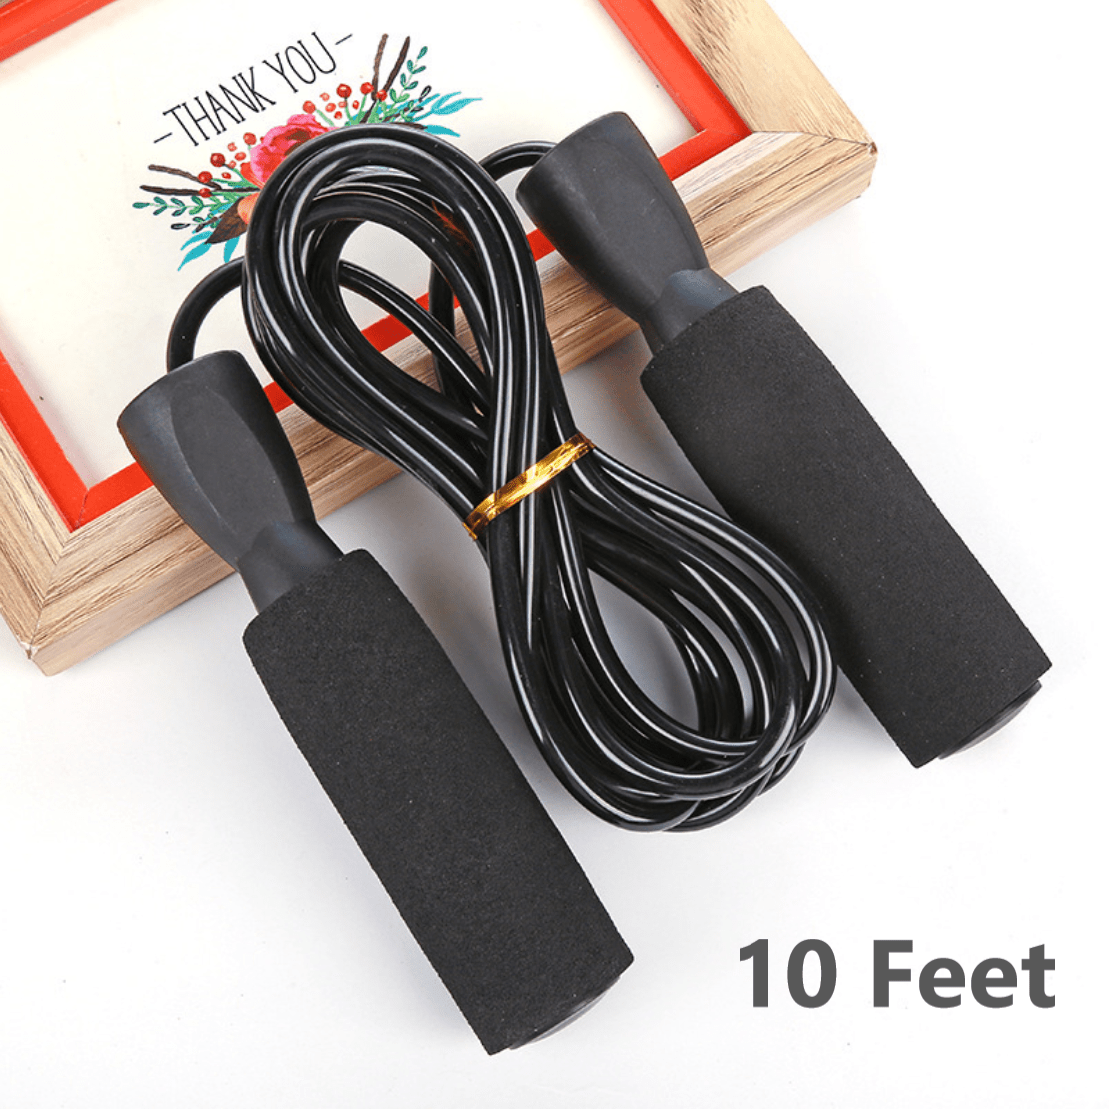 Gym Aerobic Exercise Boxing Skipping Jump Rope Adjustable Bearing Speed Fitness Bearing Jump Rope Tangle-free Jumping Rope Speed Equipments Skipping Adjustable Skipping Rope - InspiredGrabs.com